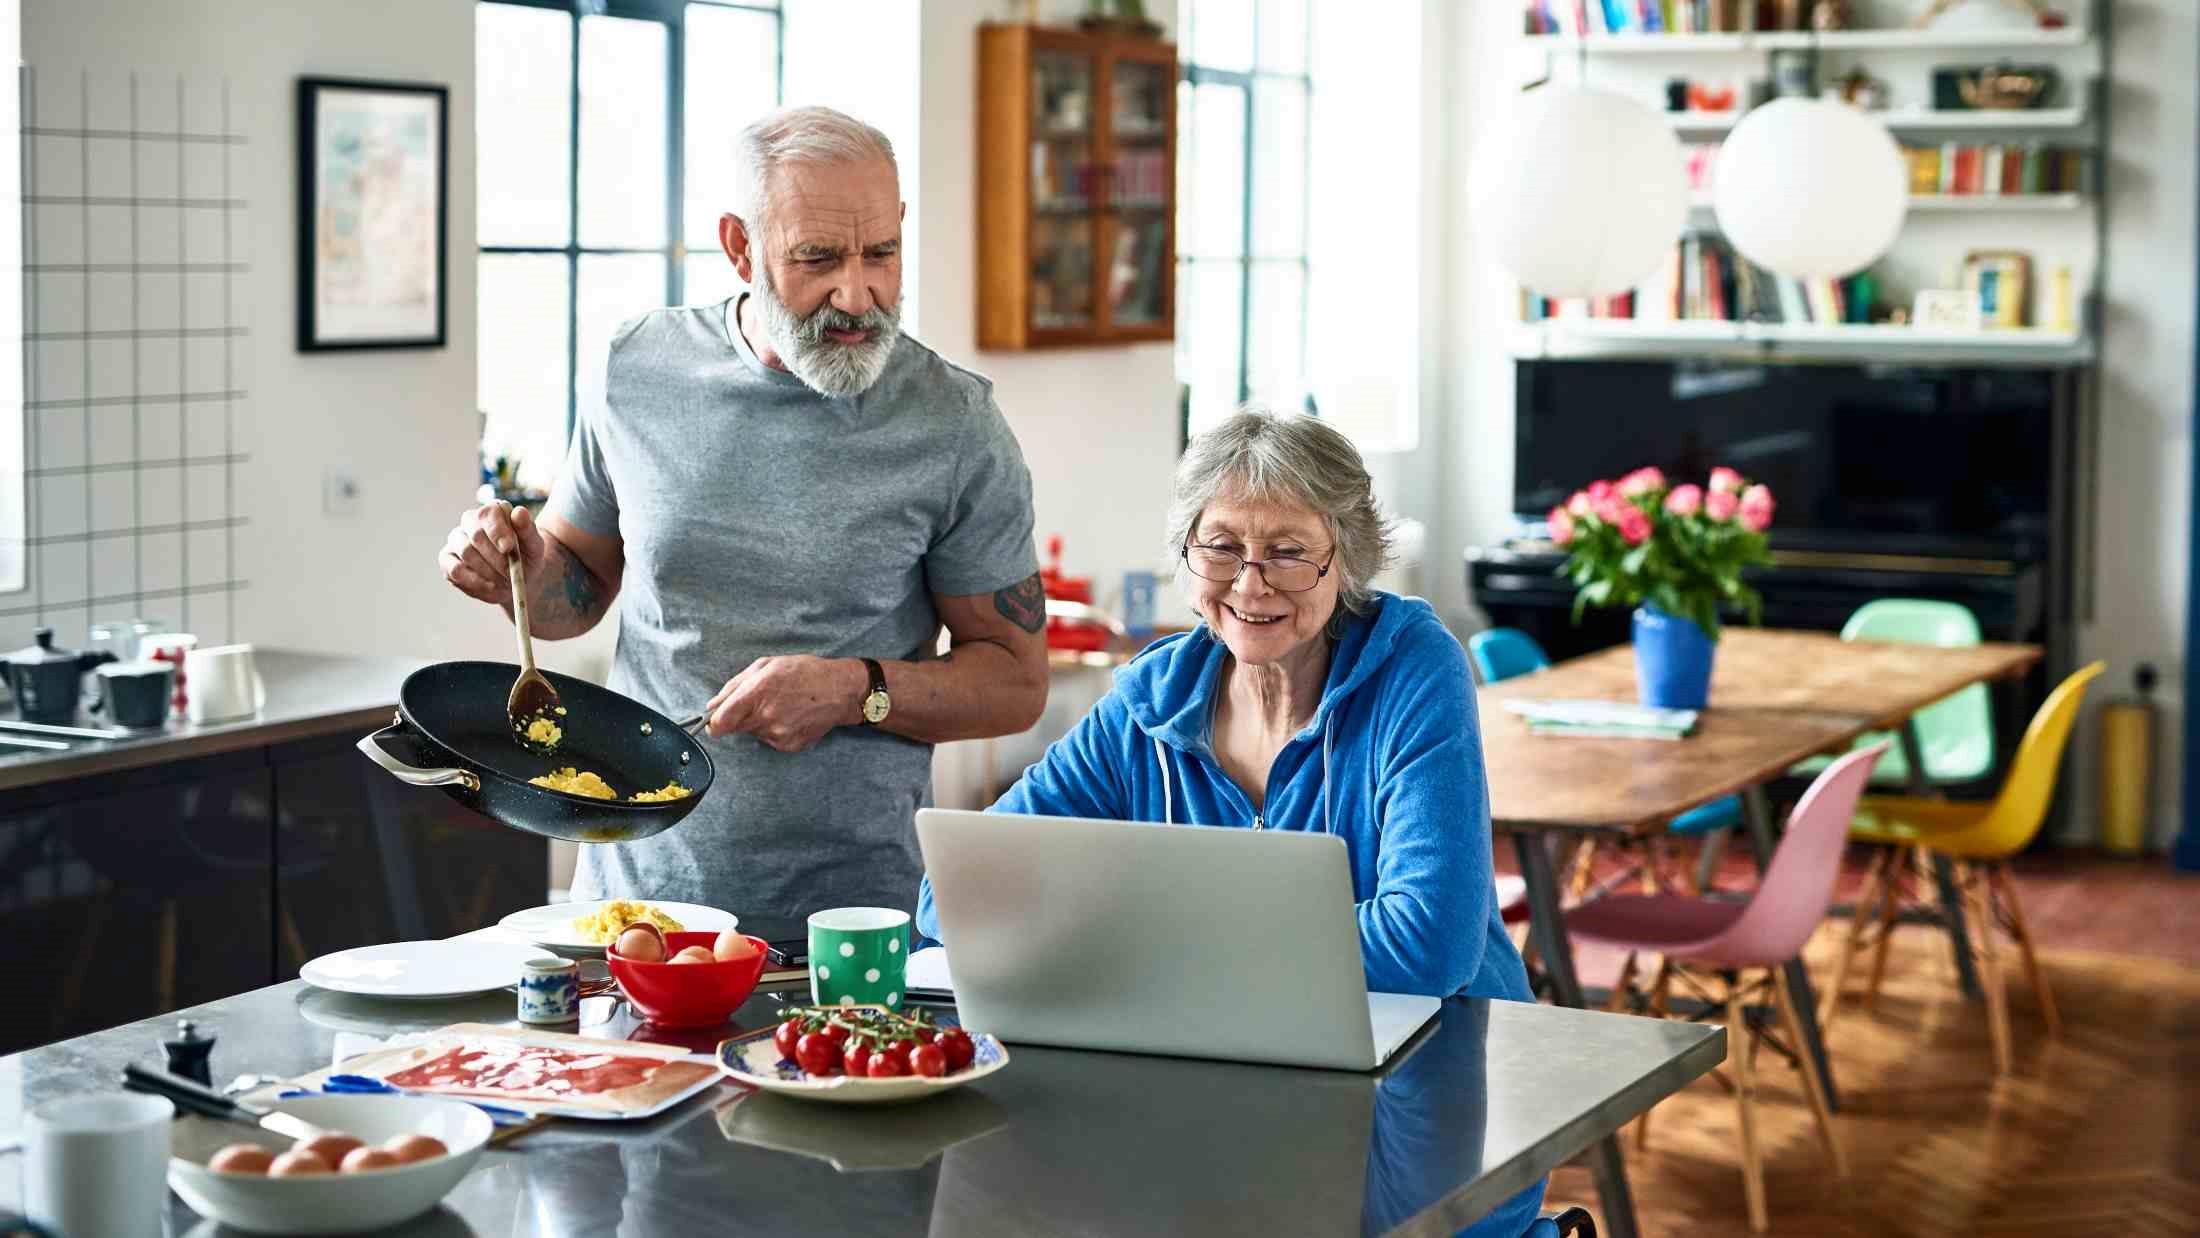 Retired couple in modern kitchen on the weekend, woman surfing the web, man holding frying pan and serving scrambled eggs